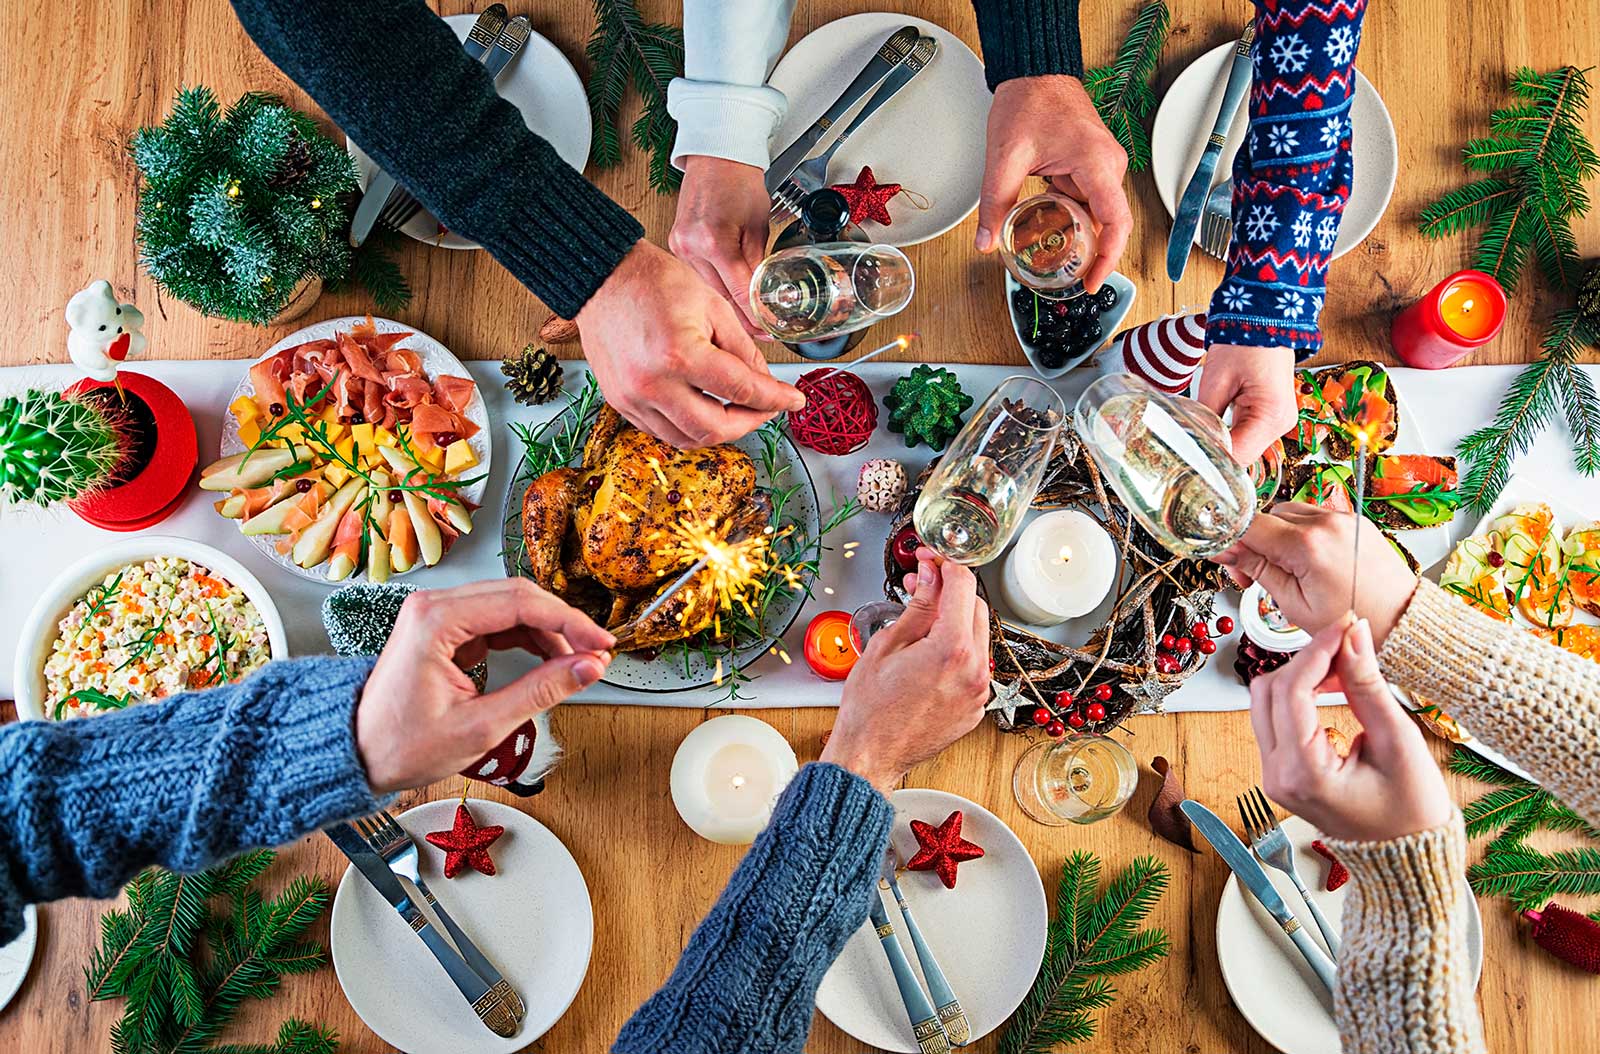 baked-turkey-christmas-dinner-the-christmas-table-is-served-with-turkey-decorated-with-bright-tinsel-and-candles-fried-chicken-table-family-dinner-top-view-hands-in-the-frame